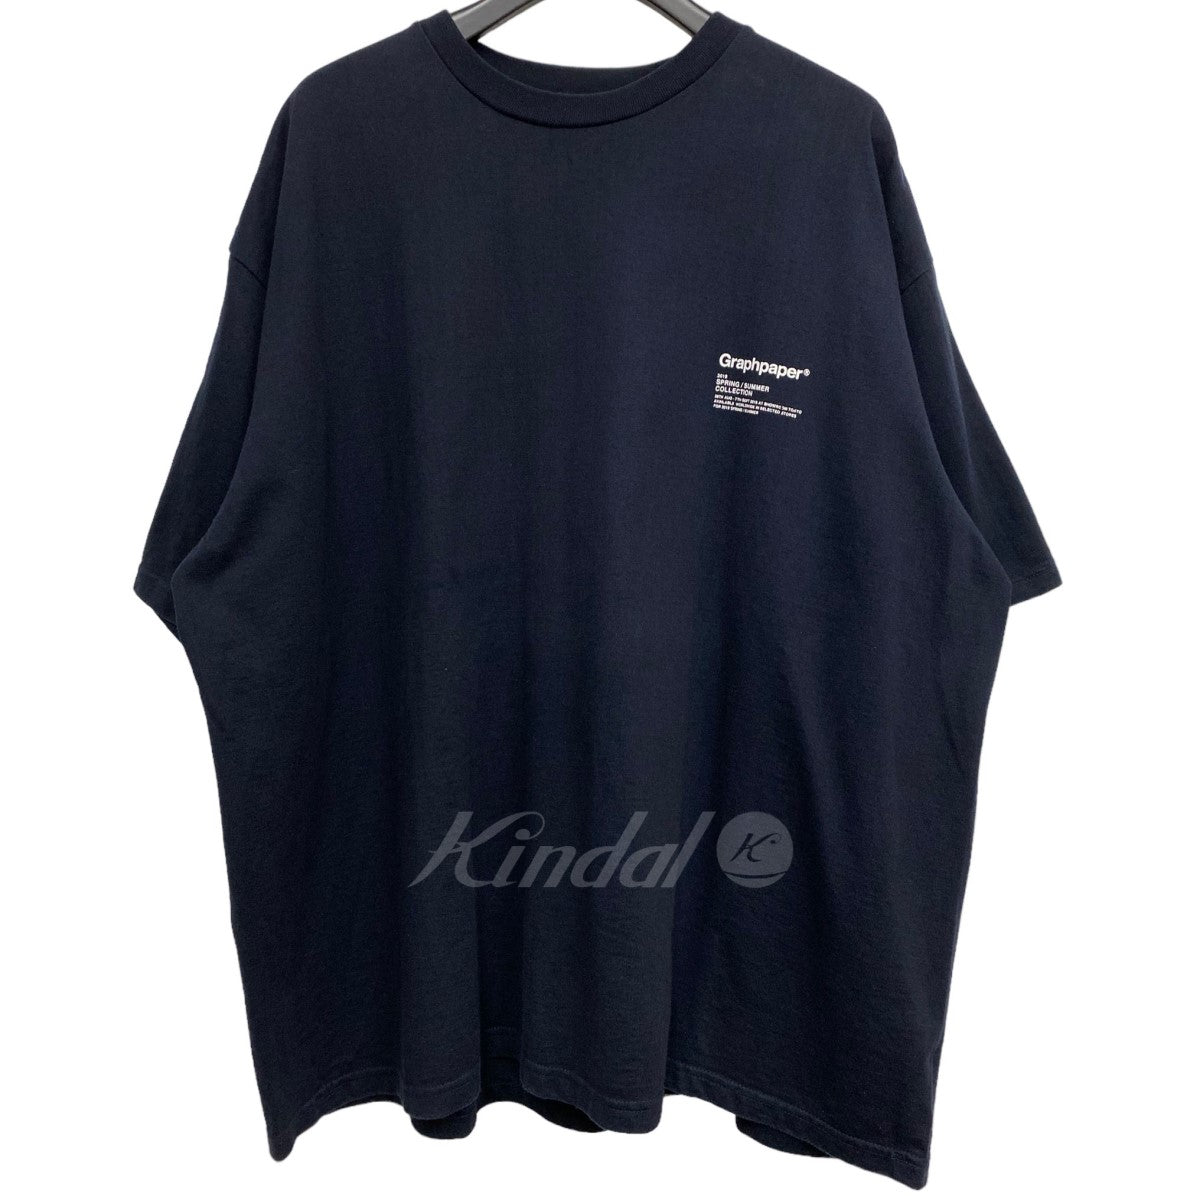 Graphpaper(グラフペーパー) 19SS POPUP限定 S／S Oversized Tee両面プリントオーバーTシャツ